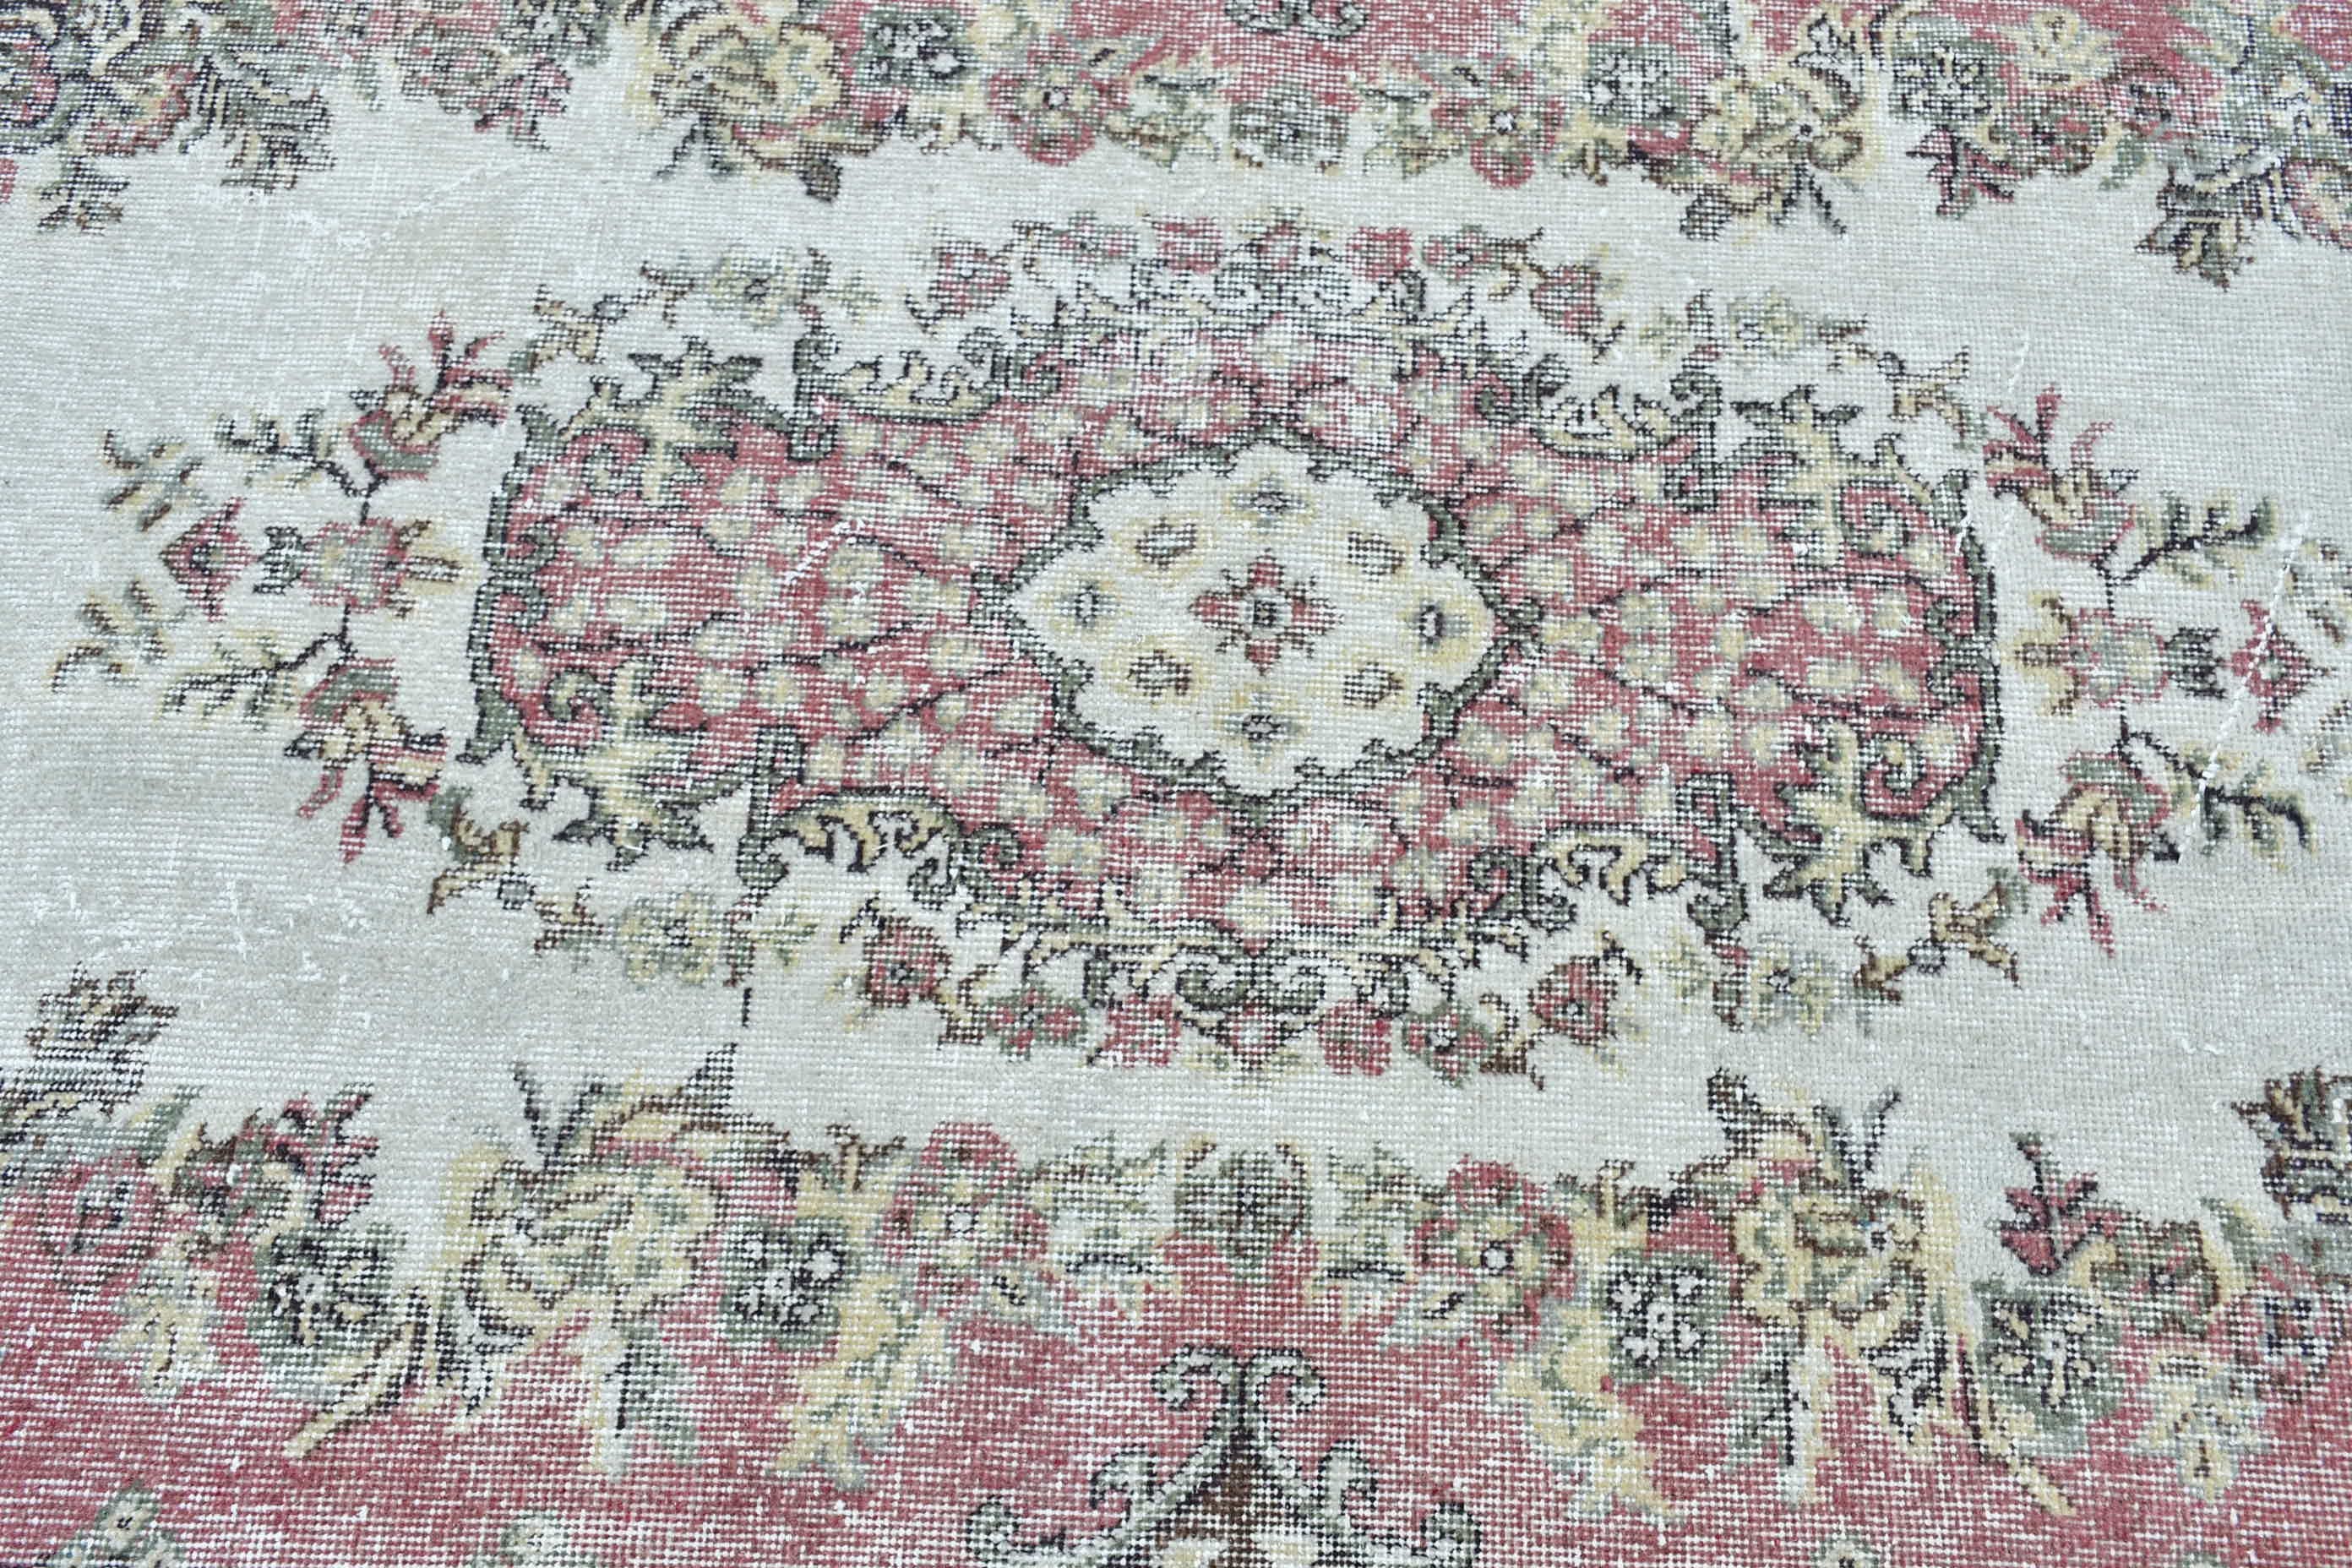 Dining Room Rug, Red Antique Rug, 4x7.2 ft Area Rug, Vintage Rug, Cute Rugs, Rugs for Area, Bedroom Rug, Turkish Rugs, Home Decor Rugs